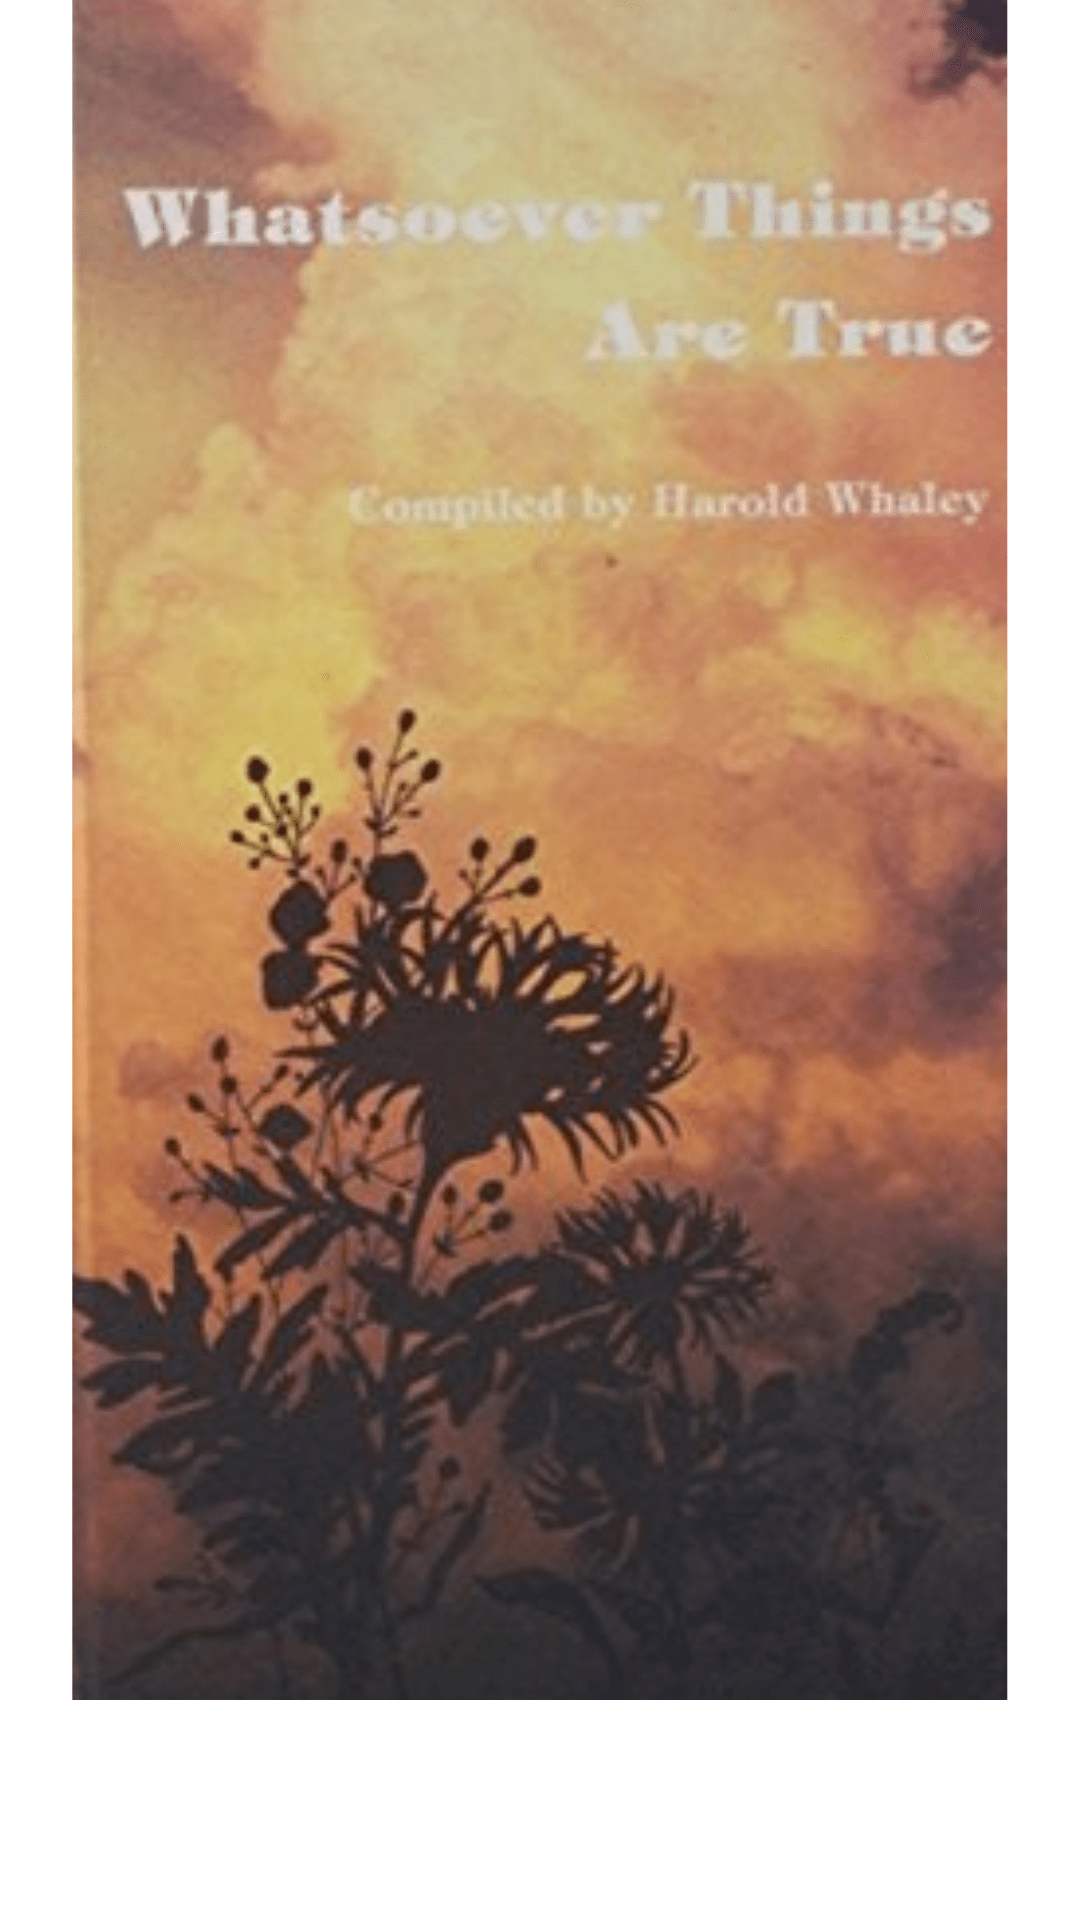 Whatsoever things are true by Harold Whaley